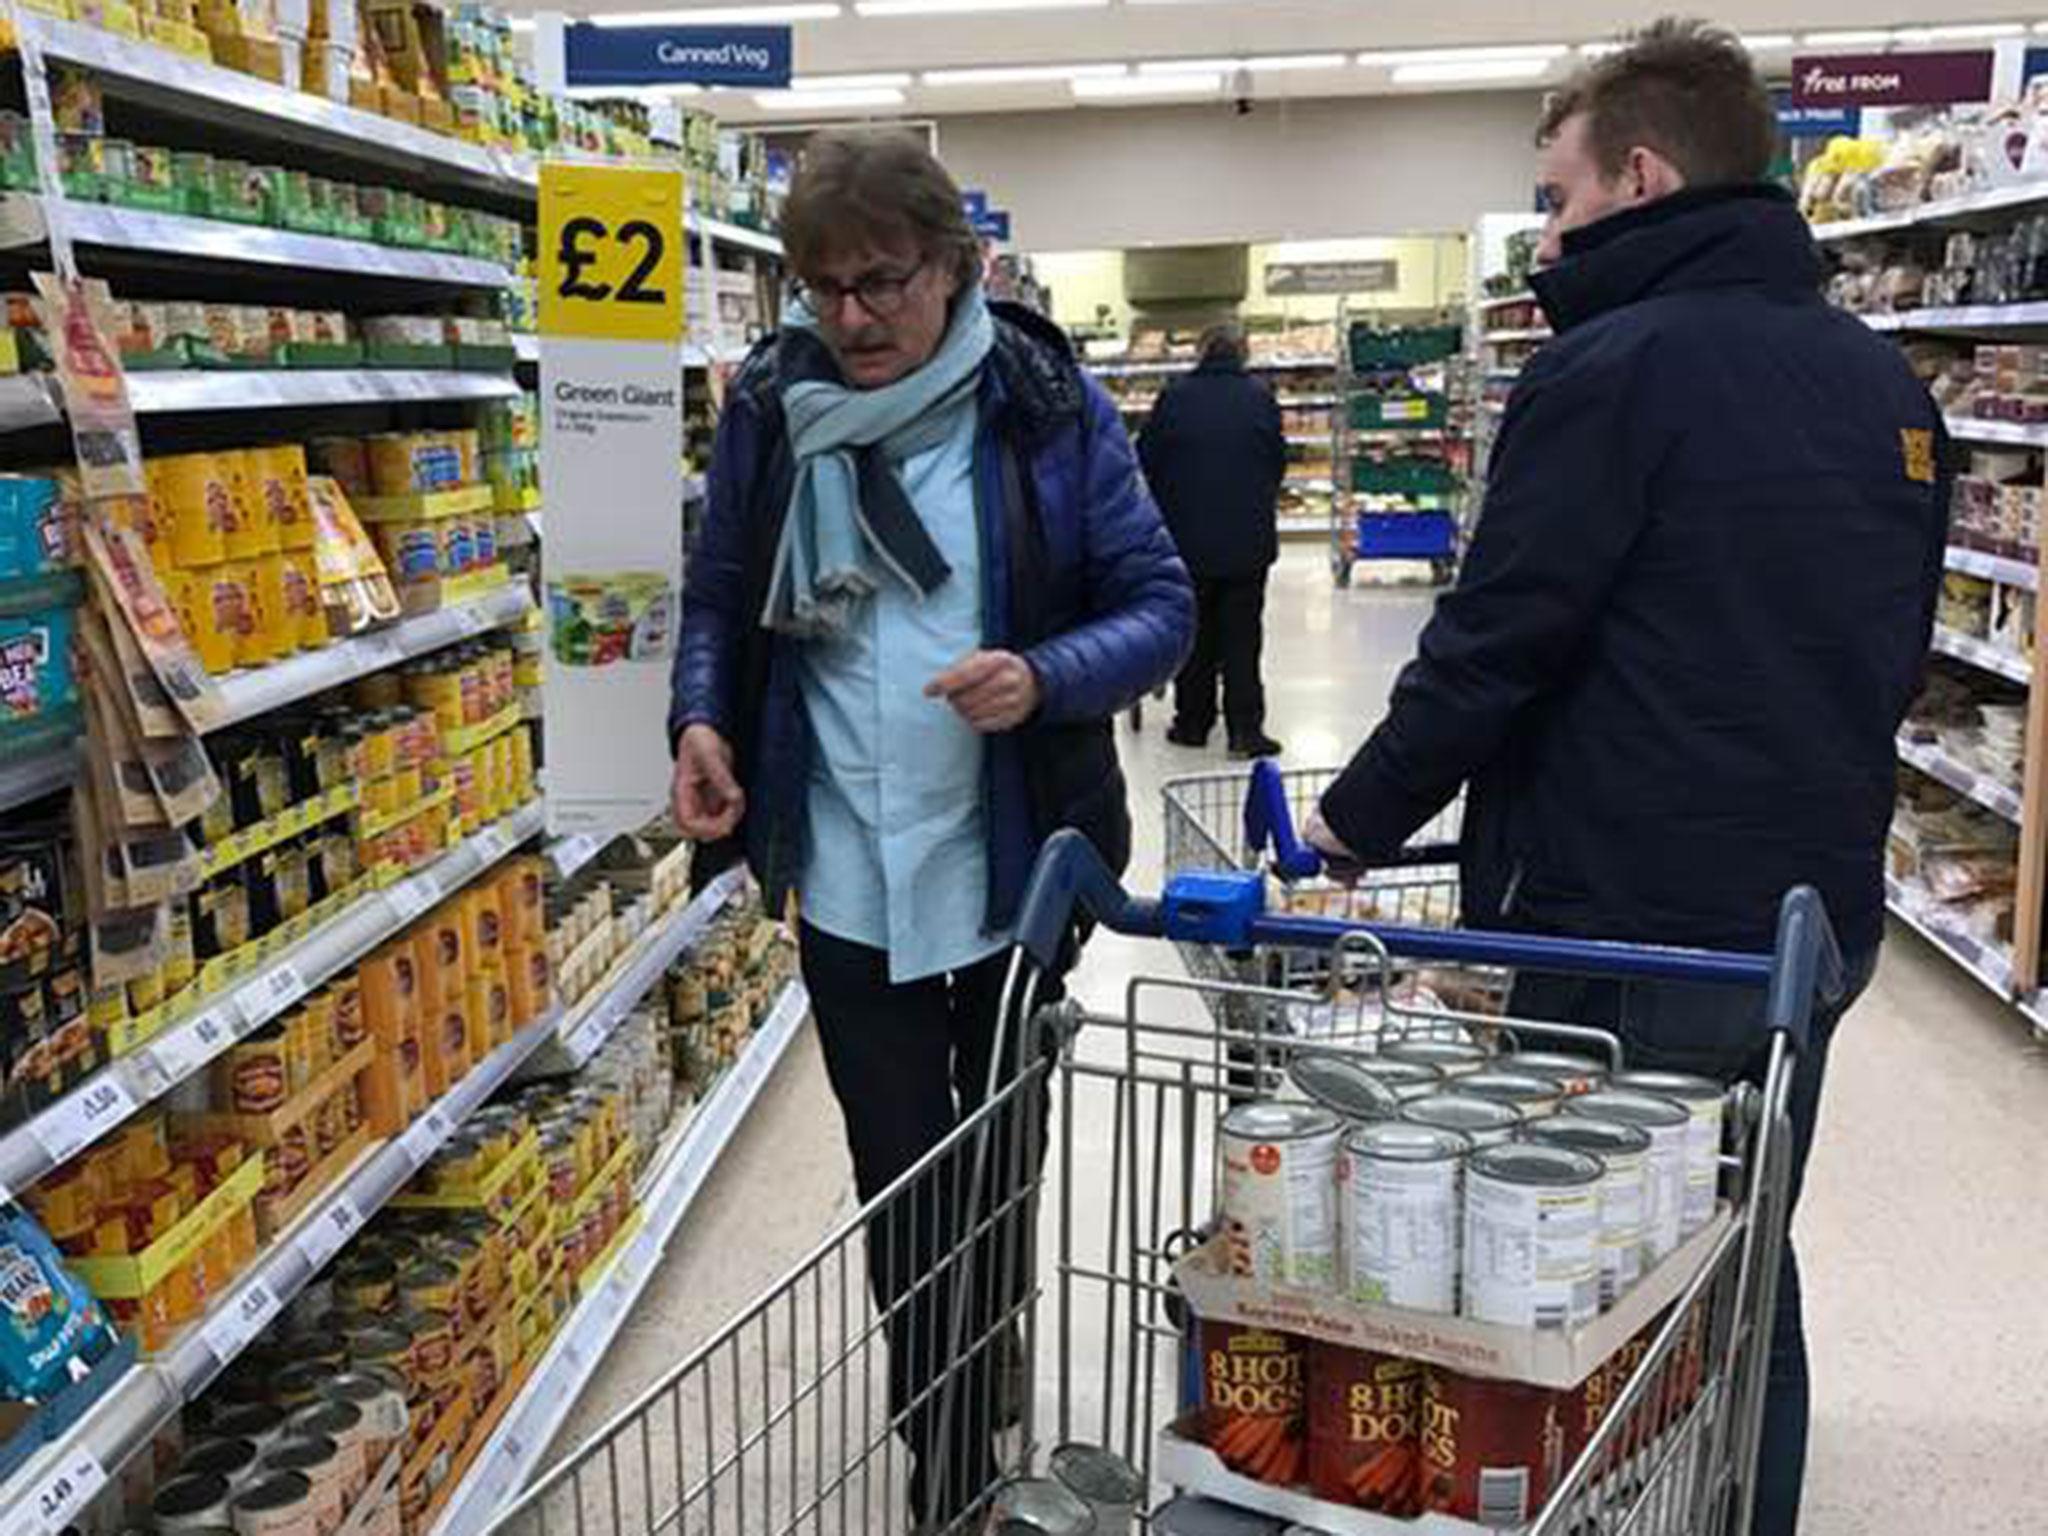 Peter Chamberlain and Michael Taub were confronted by supermarket workers in Brent as they tried to purchase tinned food